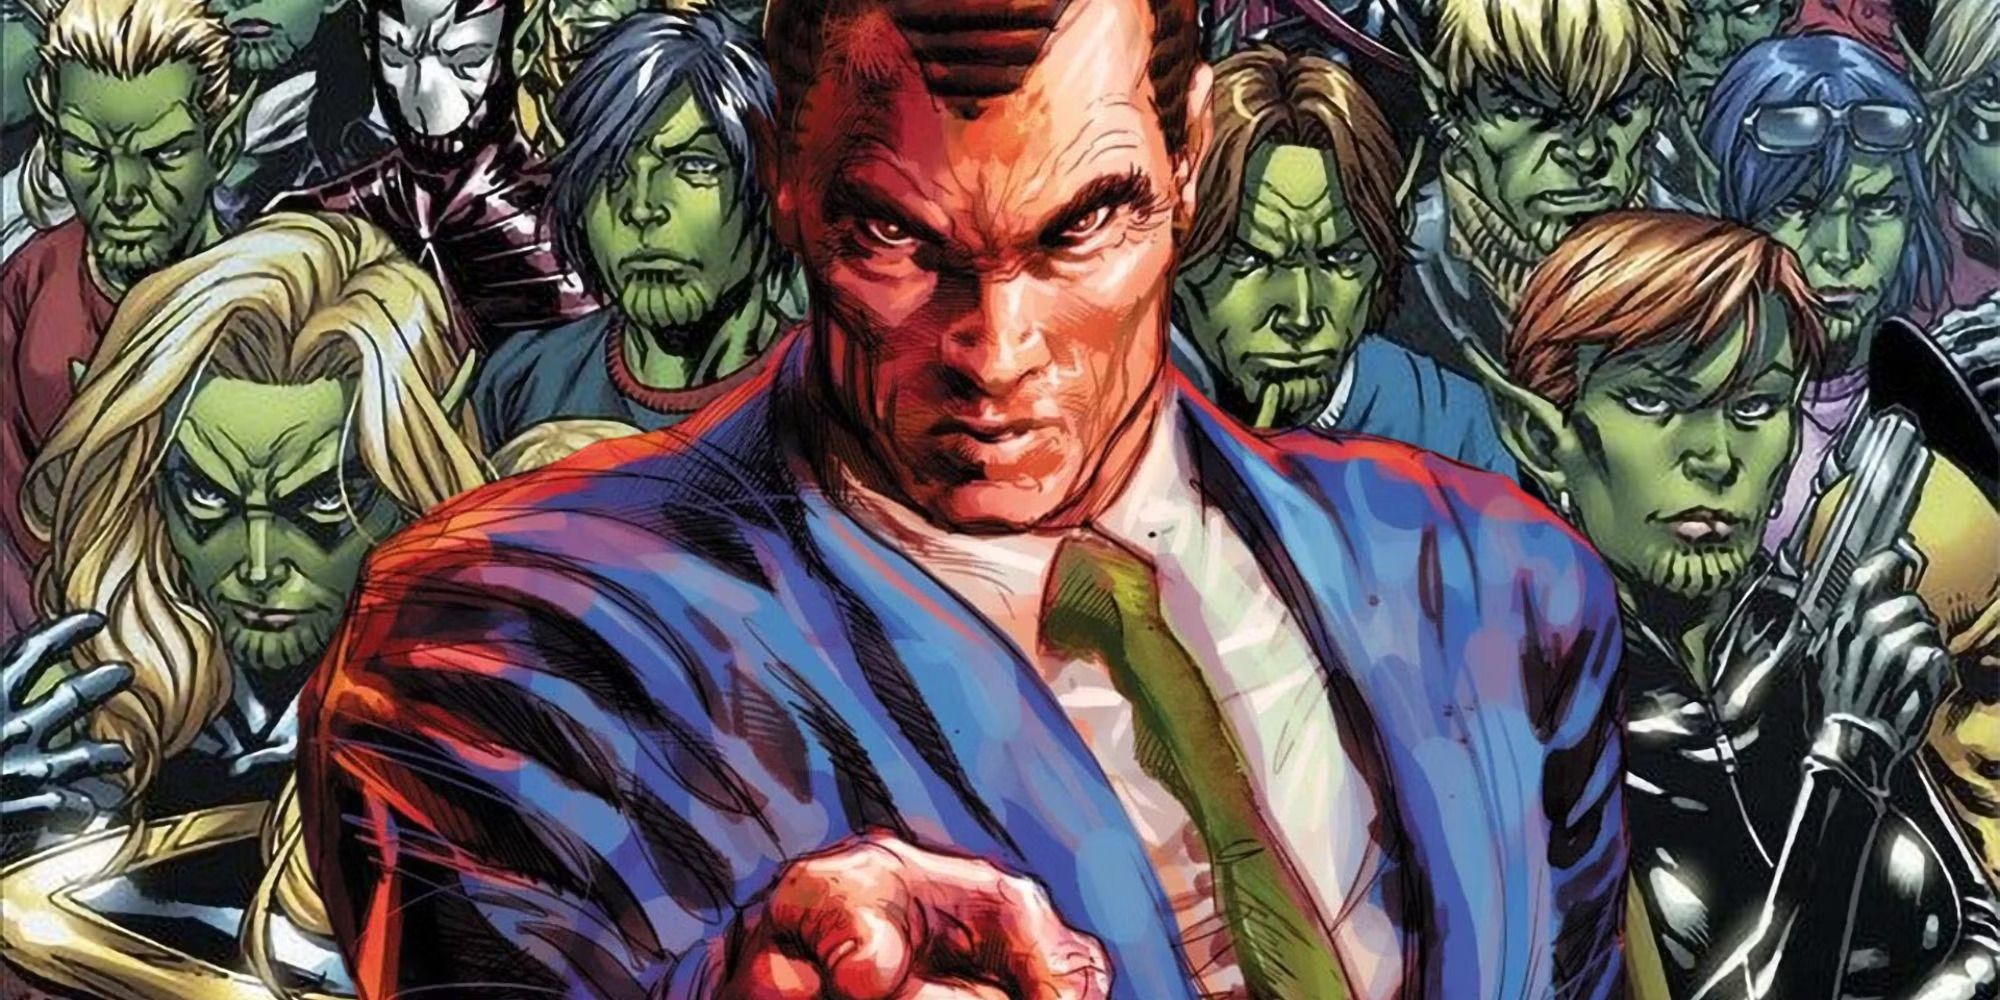 Who are the main characters you need to know in Secret Invasion?